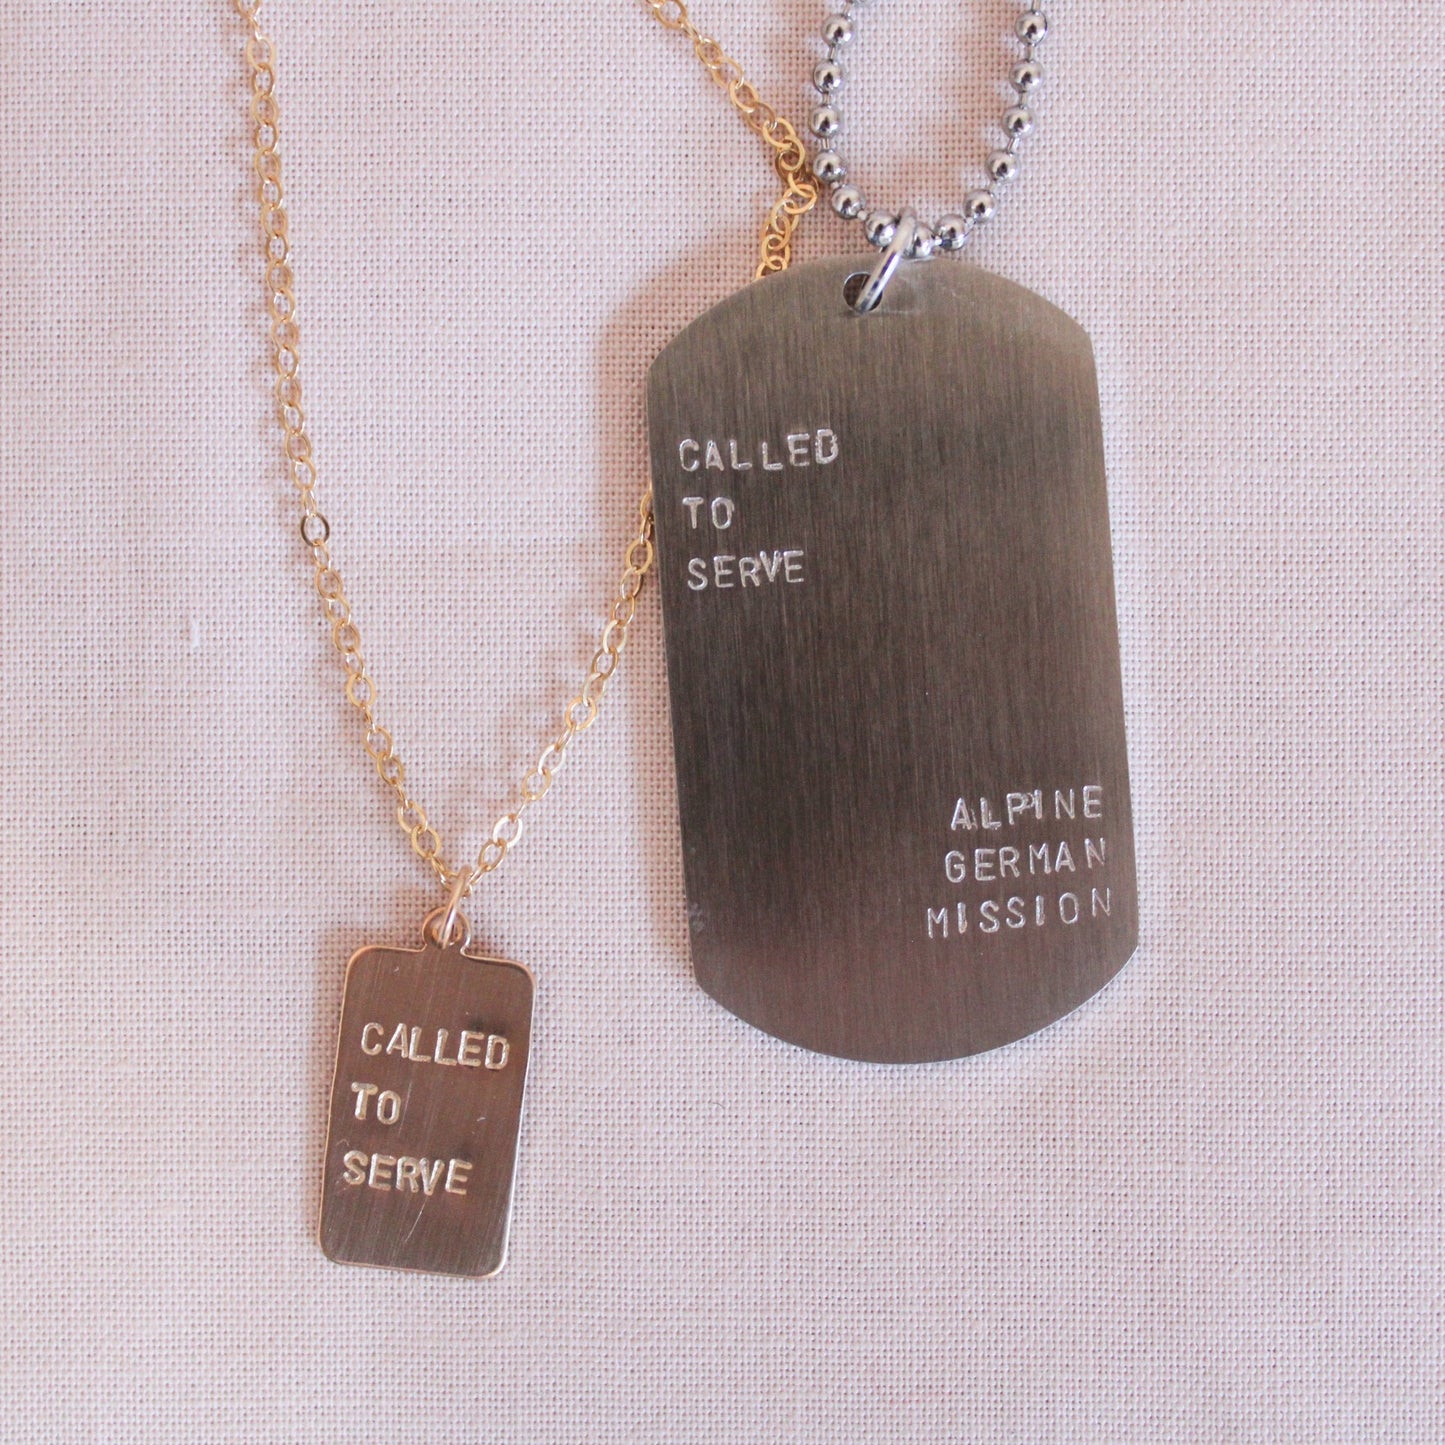 Called To Serve - Mission Necklace